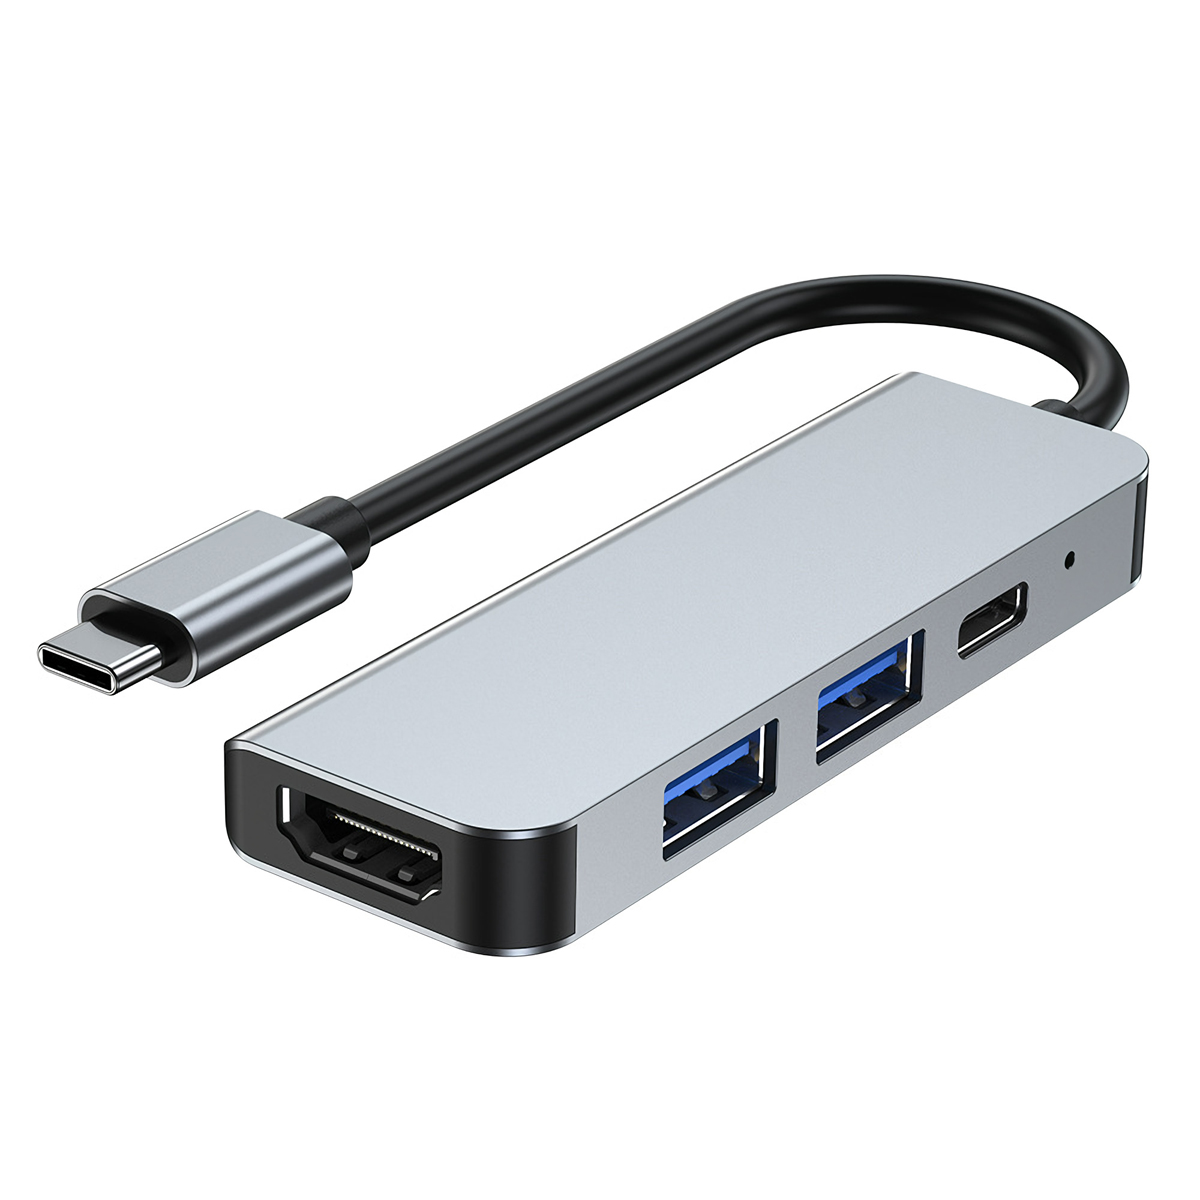 4 In 1 USB 3.0 Hub Type-C Docking Station USB Adapter with USB 2.0 USB 3.0 PD 3.0 Power HDMI for PC Laptop Matebook HUAWEI XIAOMI Macbook Pro